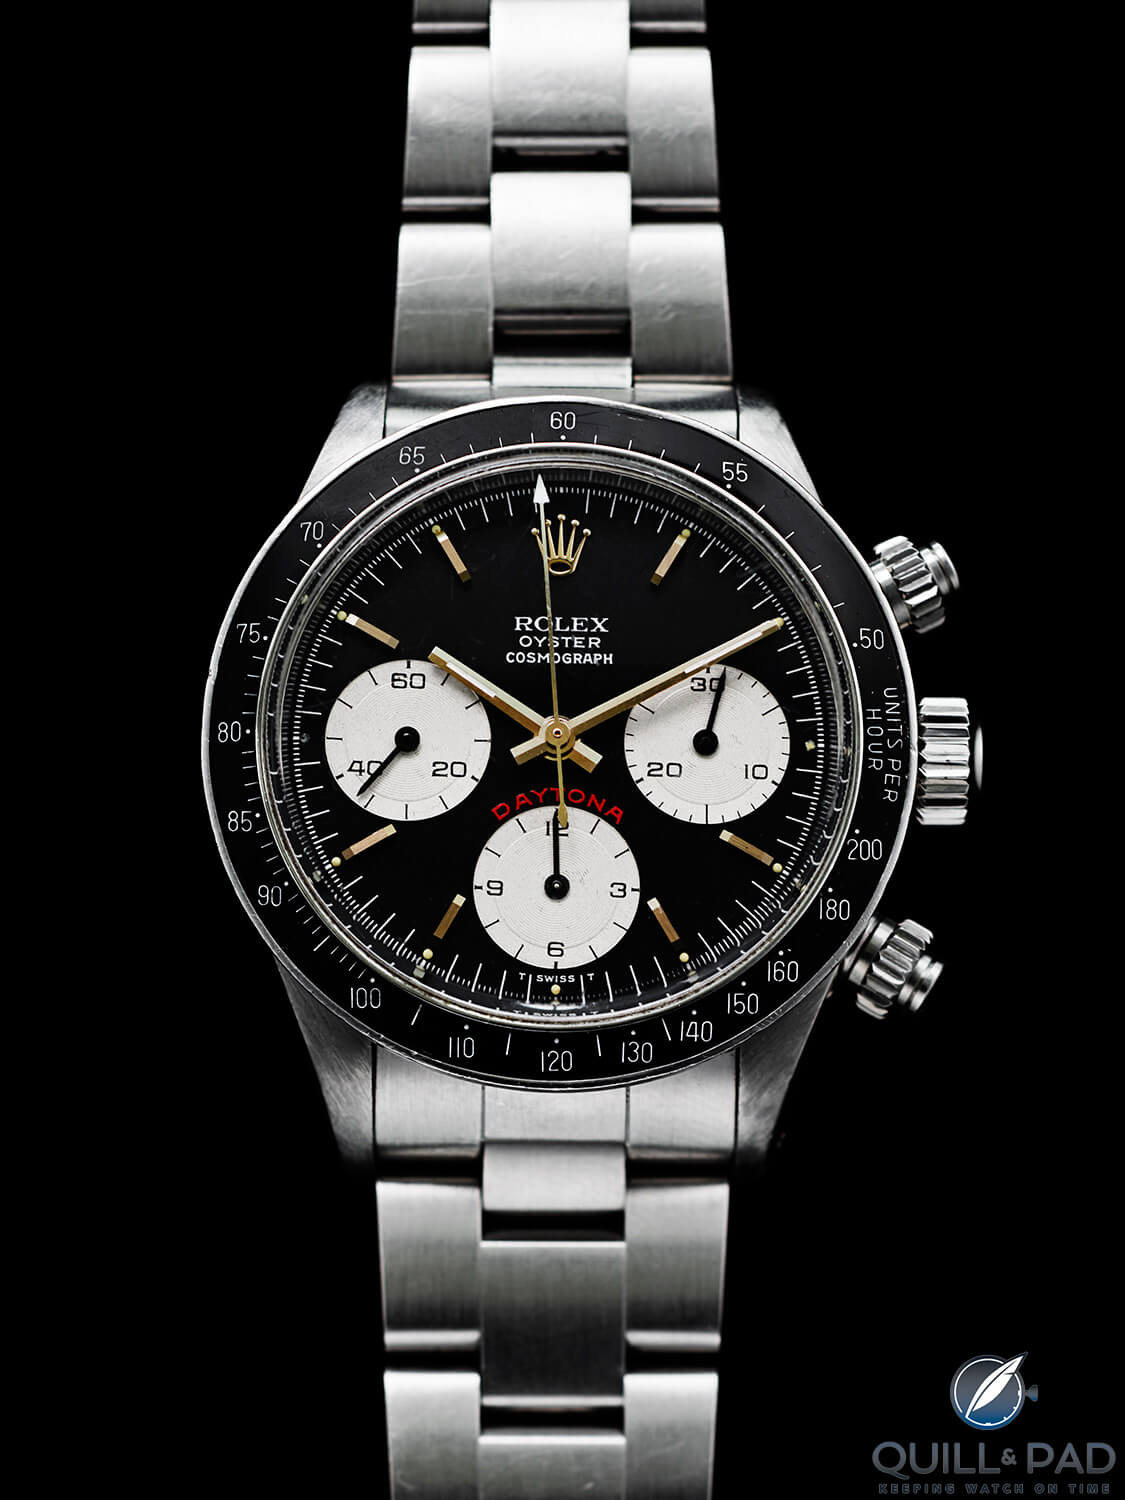 Rolex Daytona Reference 6263 owned by Paul Newman (excerpted from 'A Man and His Watch' by Matt Hranek, Artisan Books, copyright © 2017; photographs by Stephen Lewis)